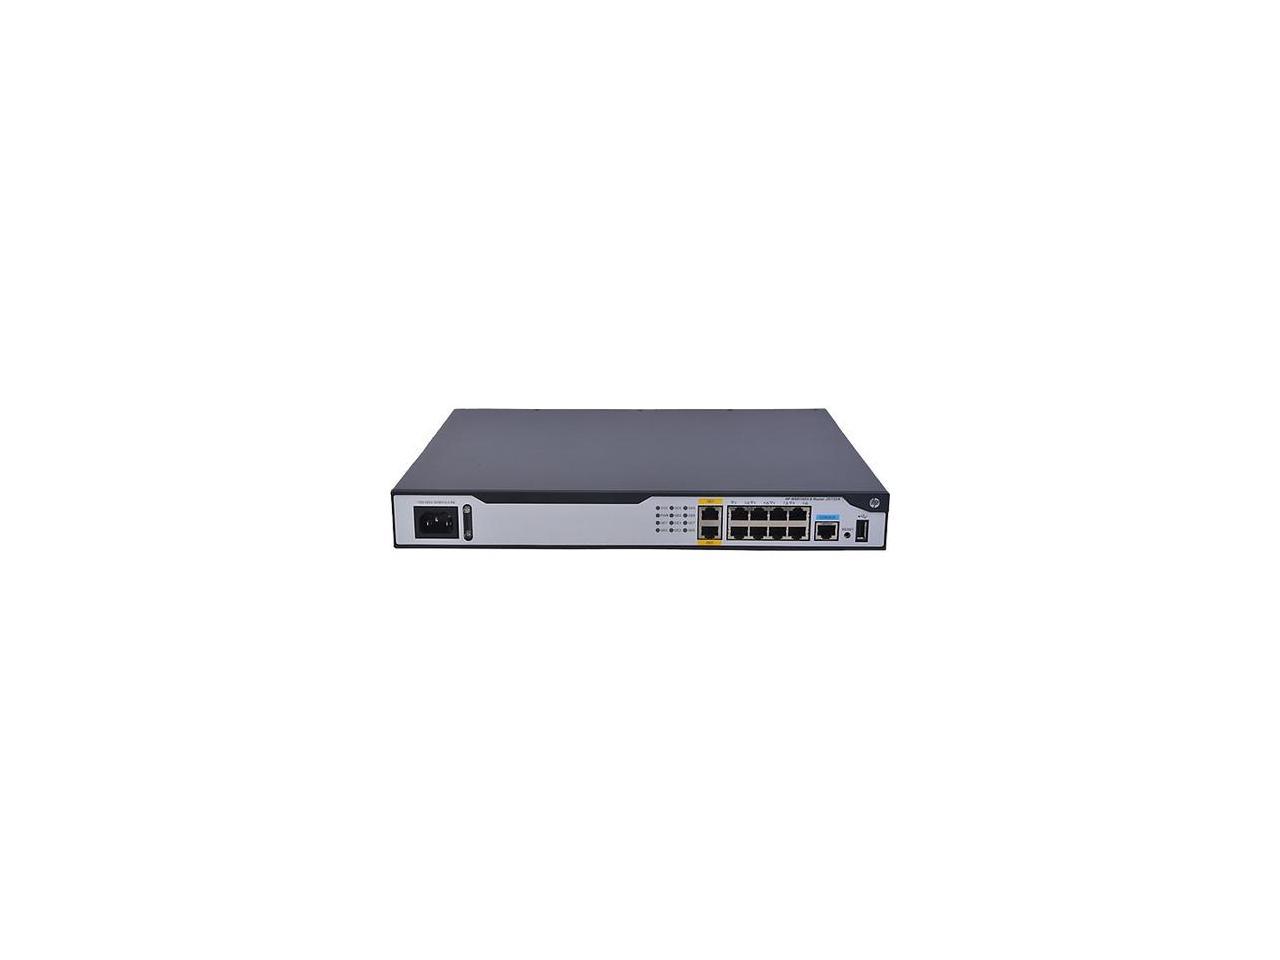 HP Msr1002-4 AC Router JG875A Power Cord Included for sale online 